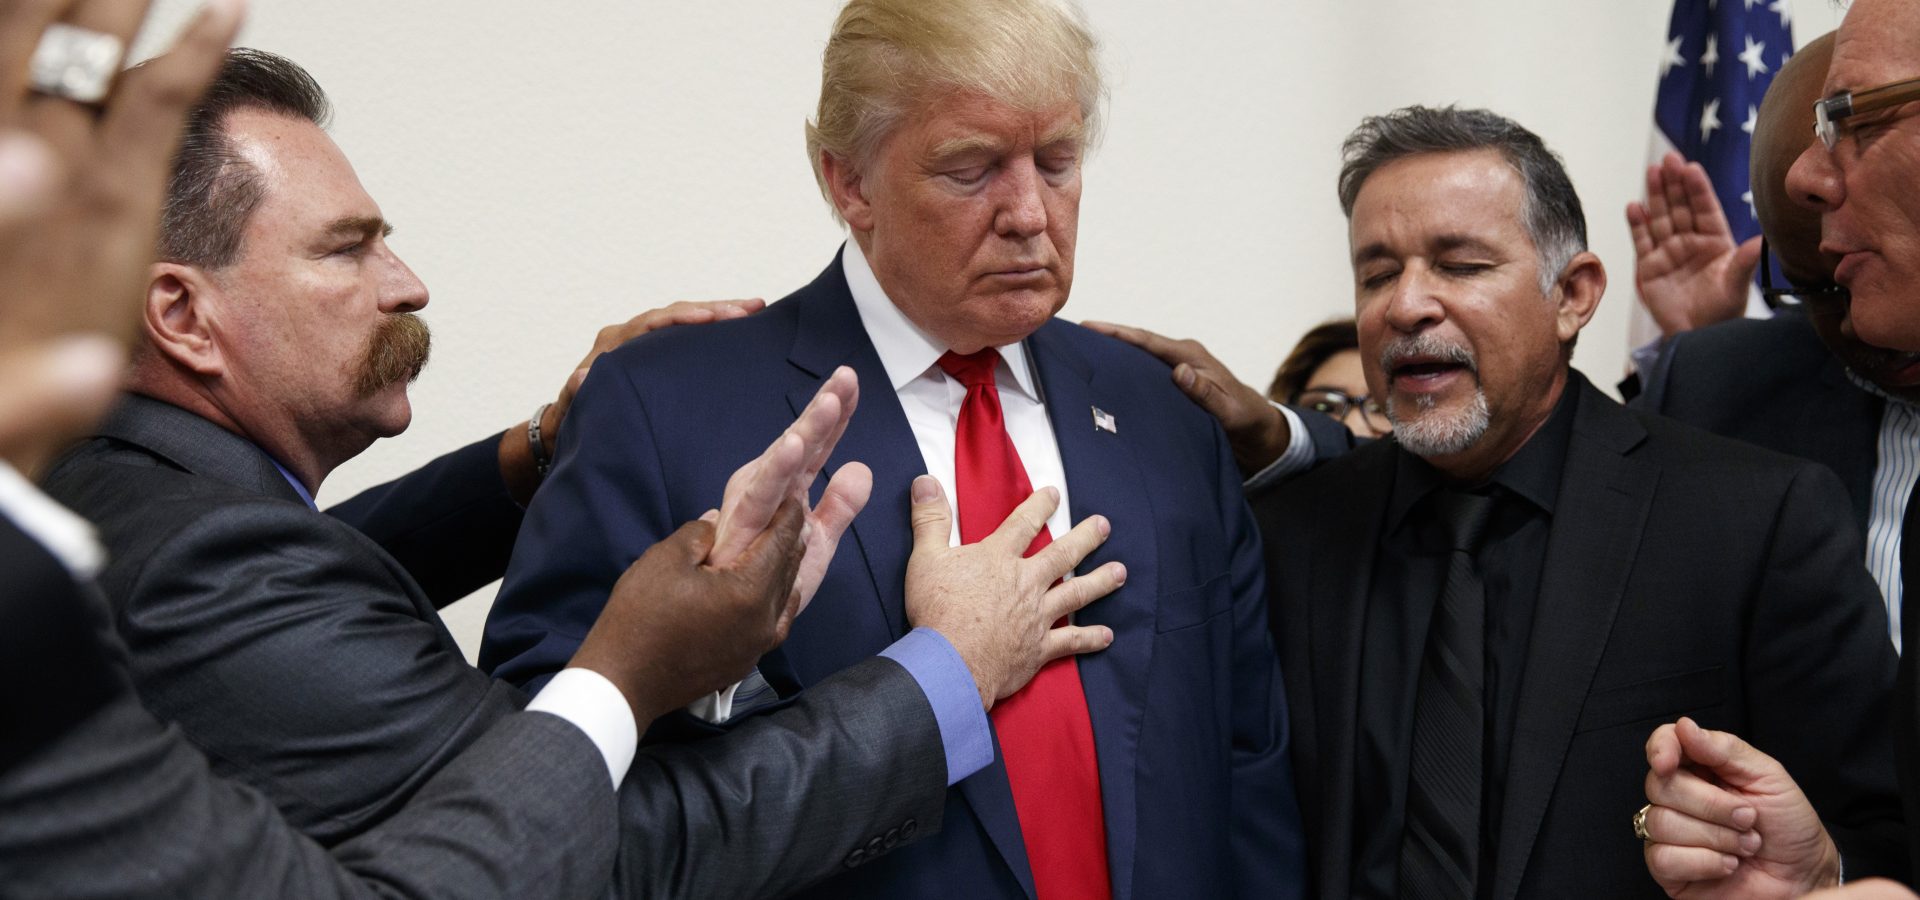 Pastors from the Las Vegas area pray with Republican presidential candidate Donald Trump during a visit to the International Church of Las Vegas, and International Christian Academy, Oct. 5, 2016, in Las Vegas. (AP Photo/ Evan Vucci)